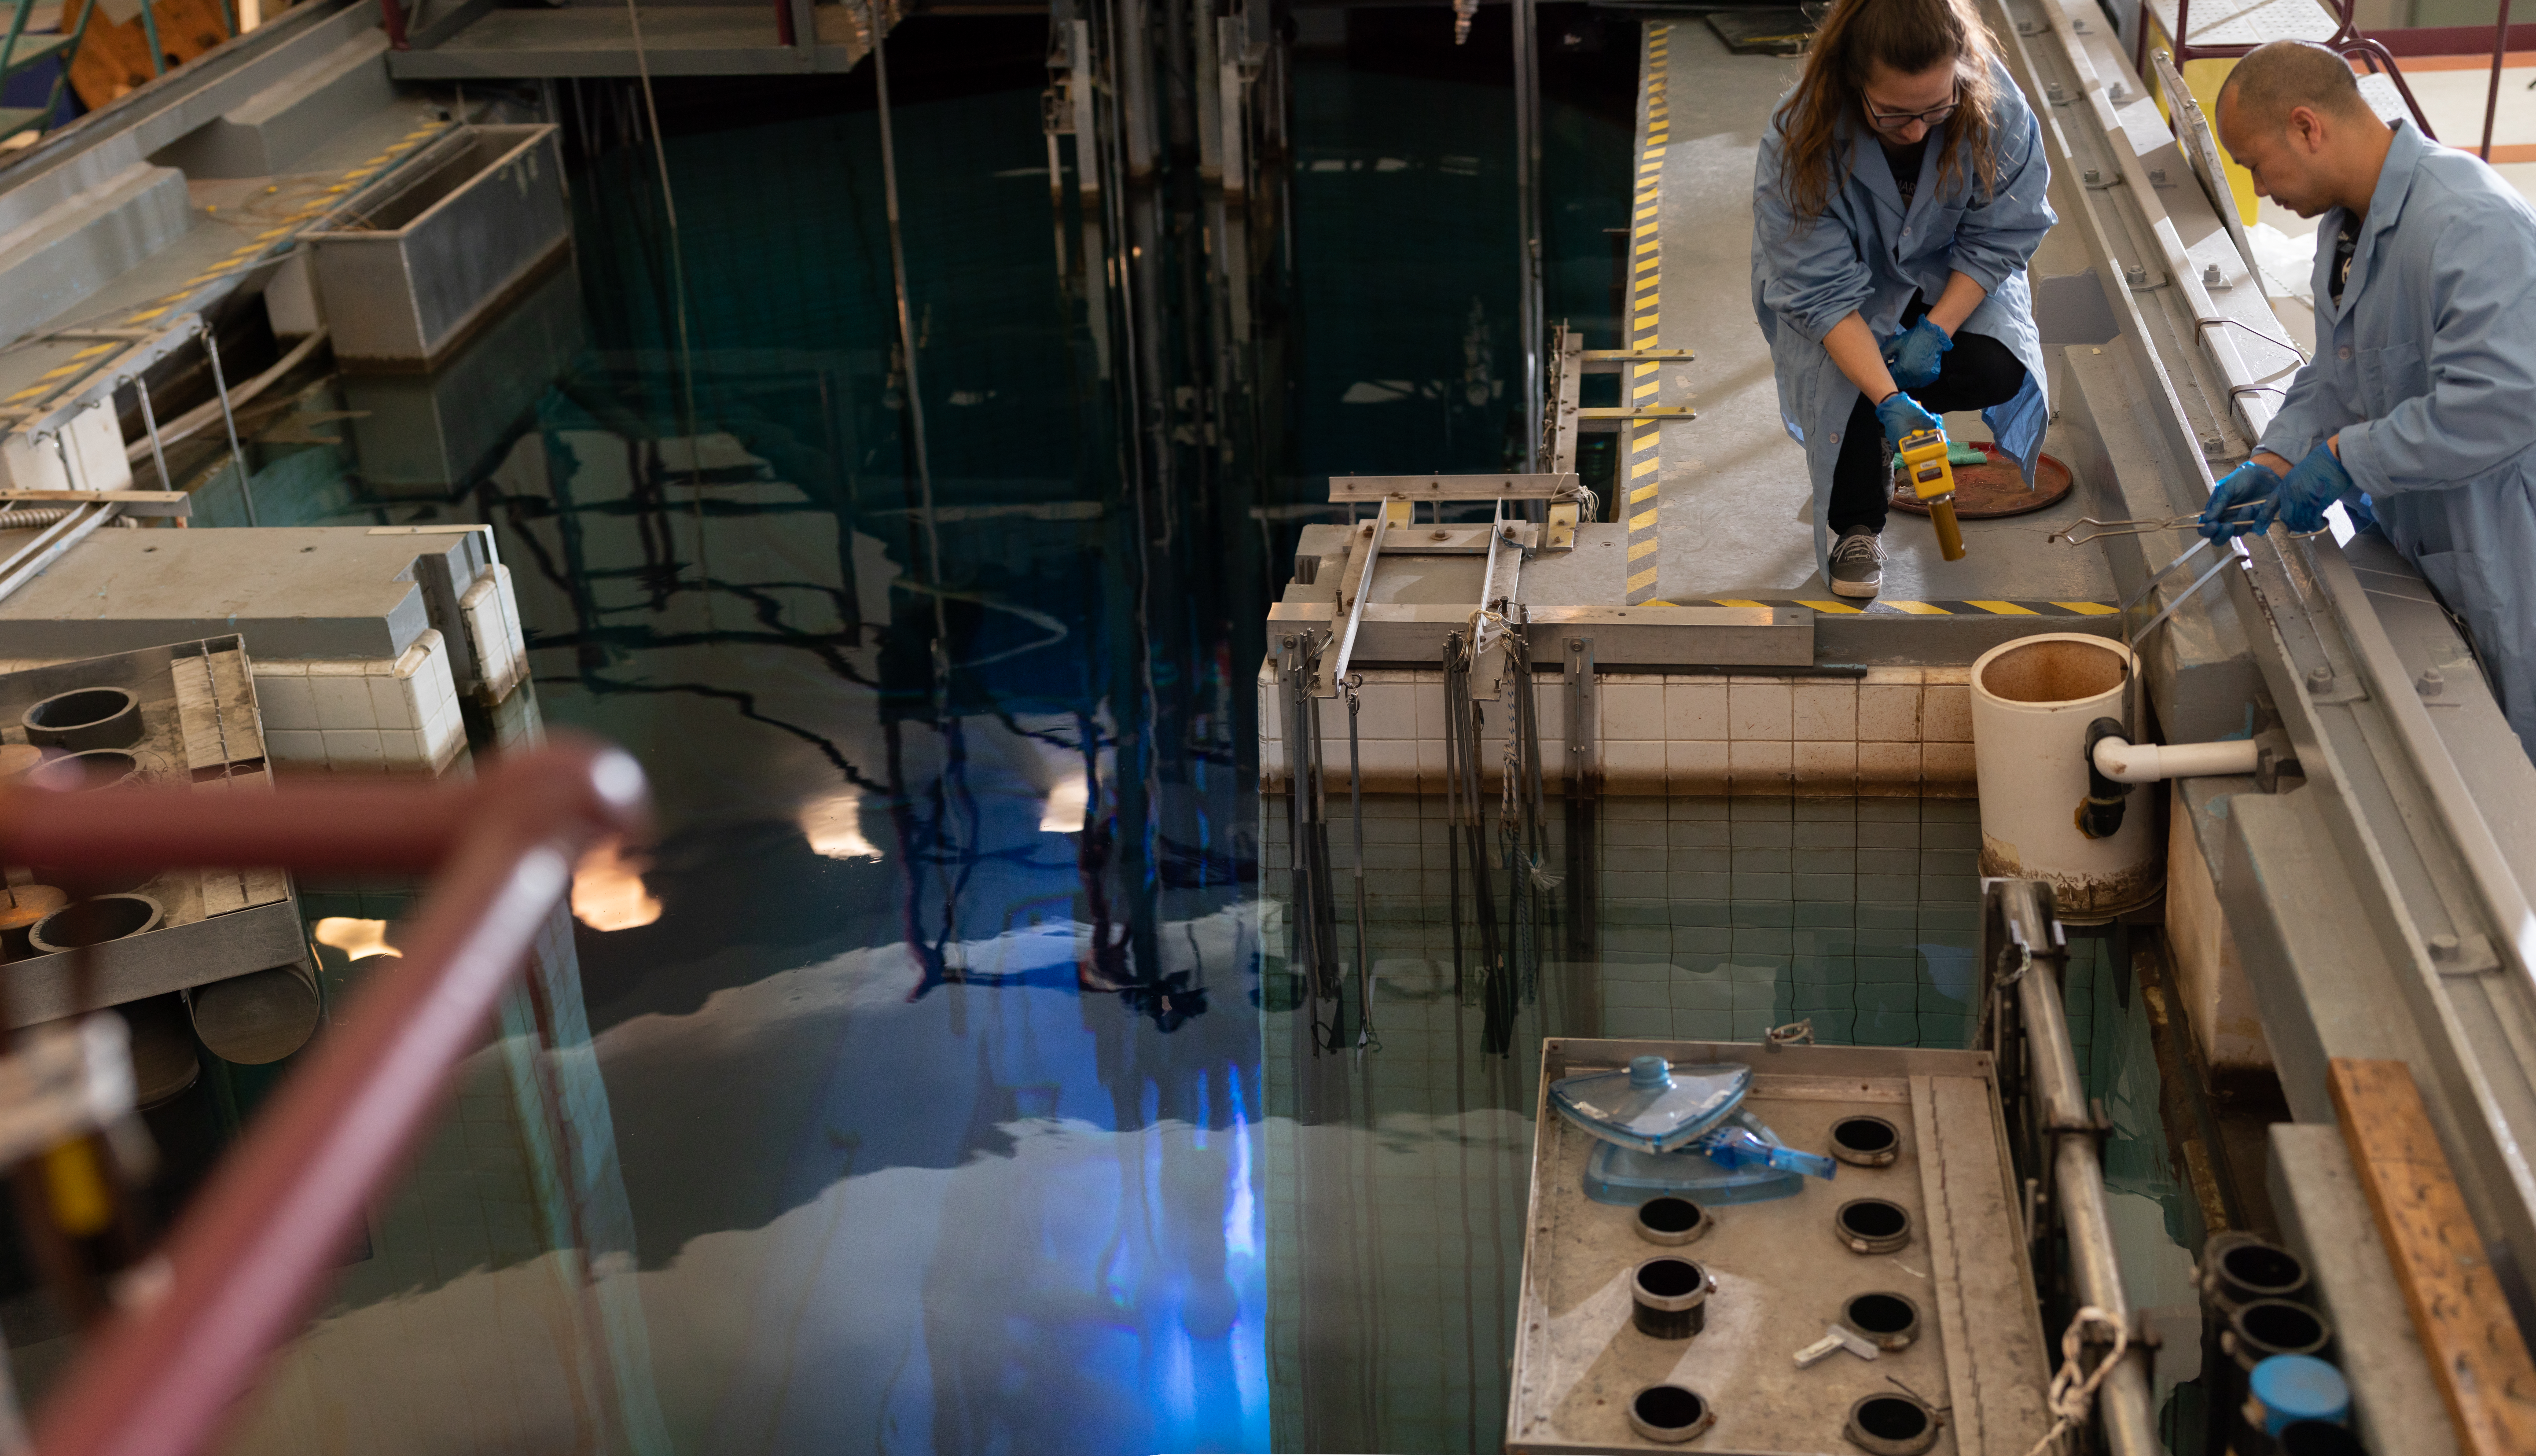 Two technicians in labcoats handle tools next to an open-pool nuclear reactor.